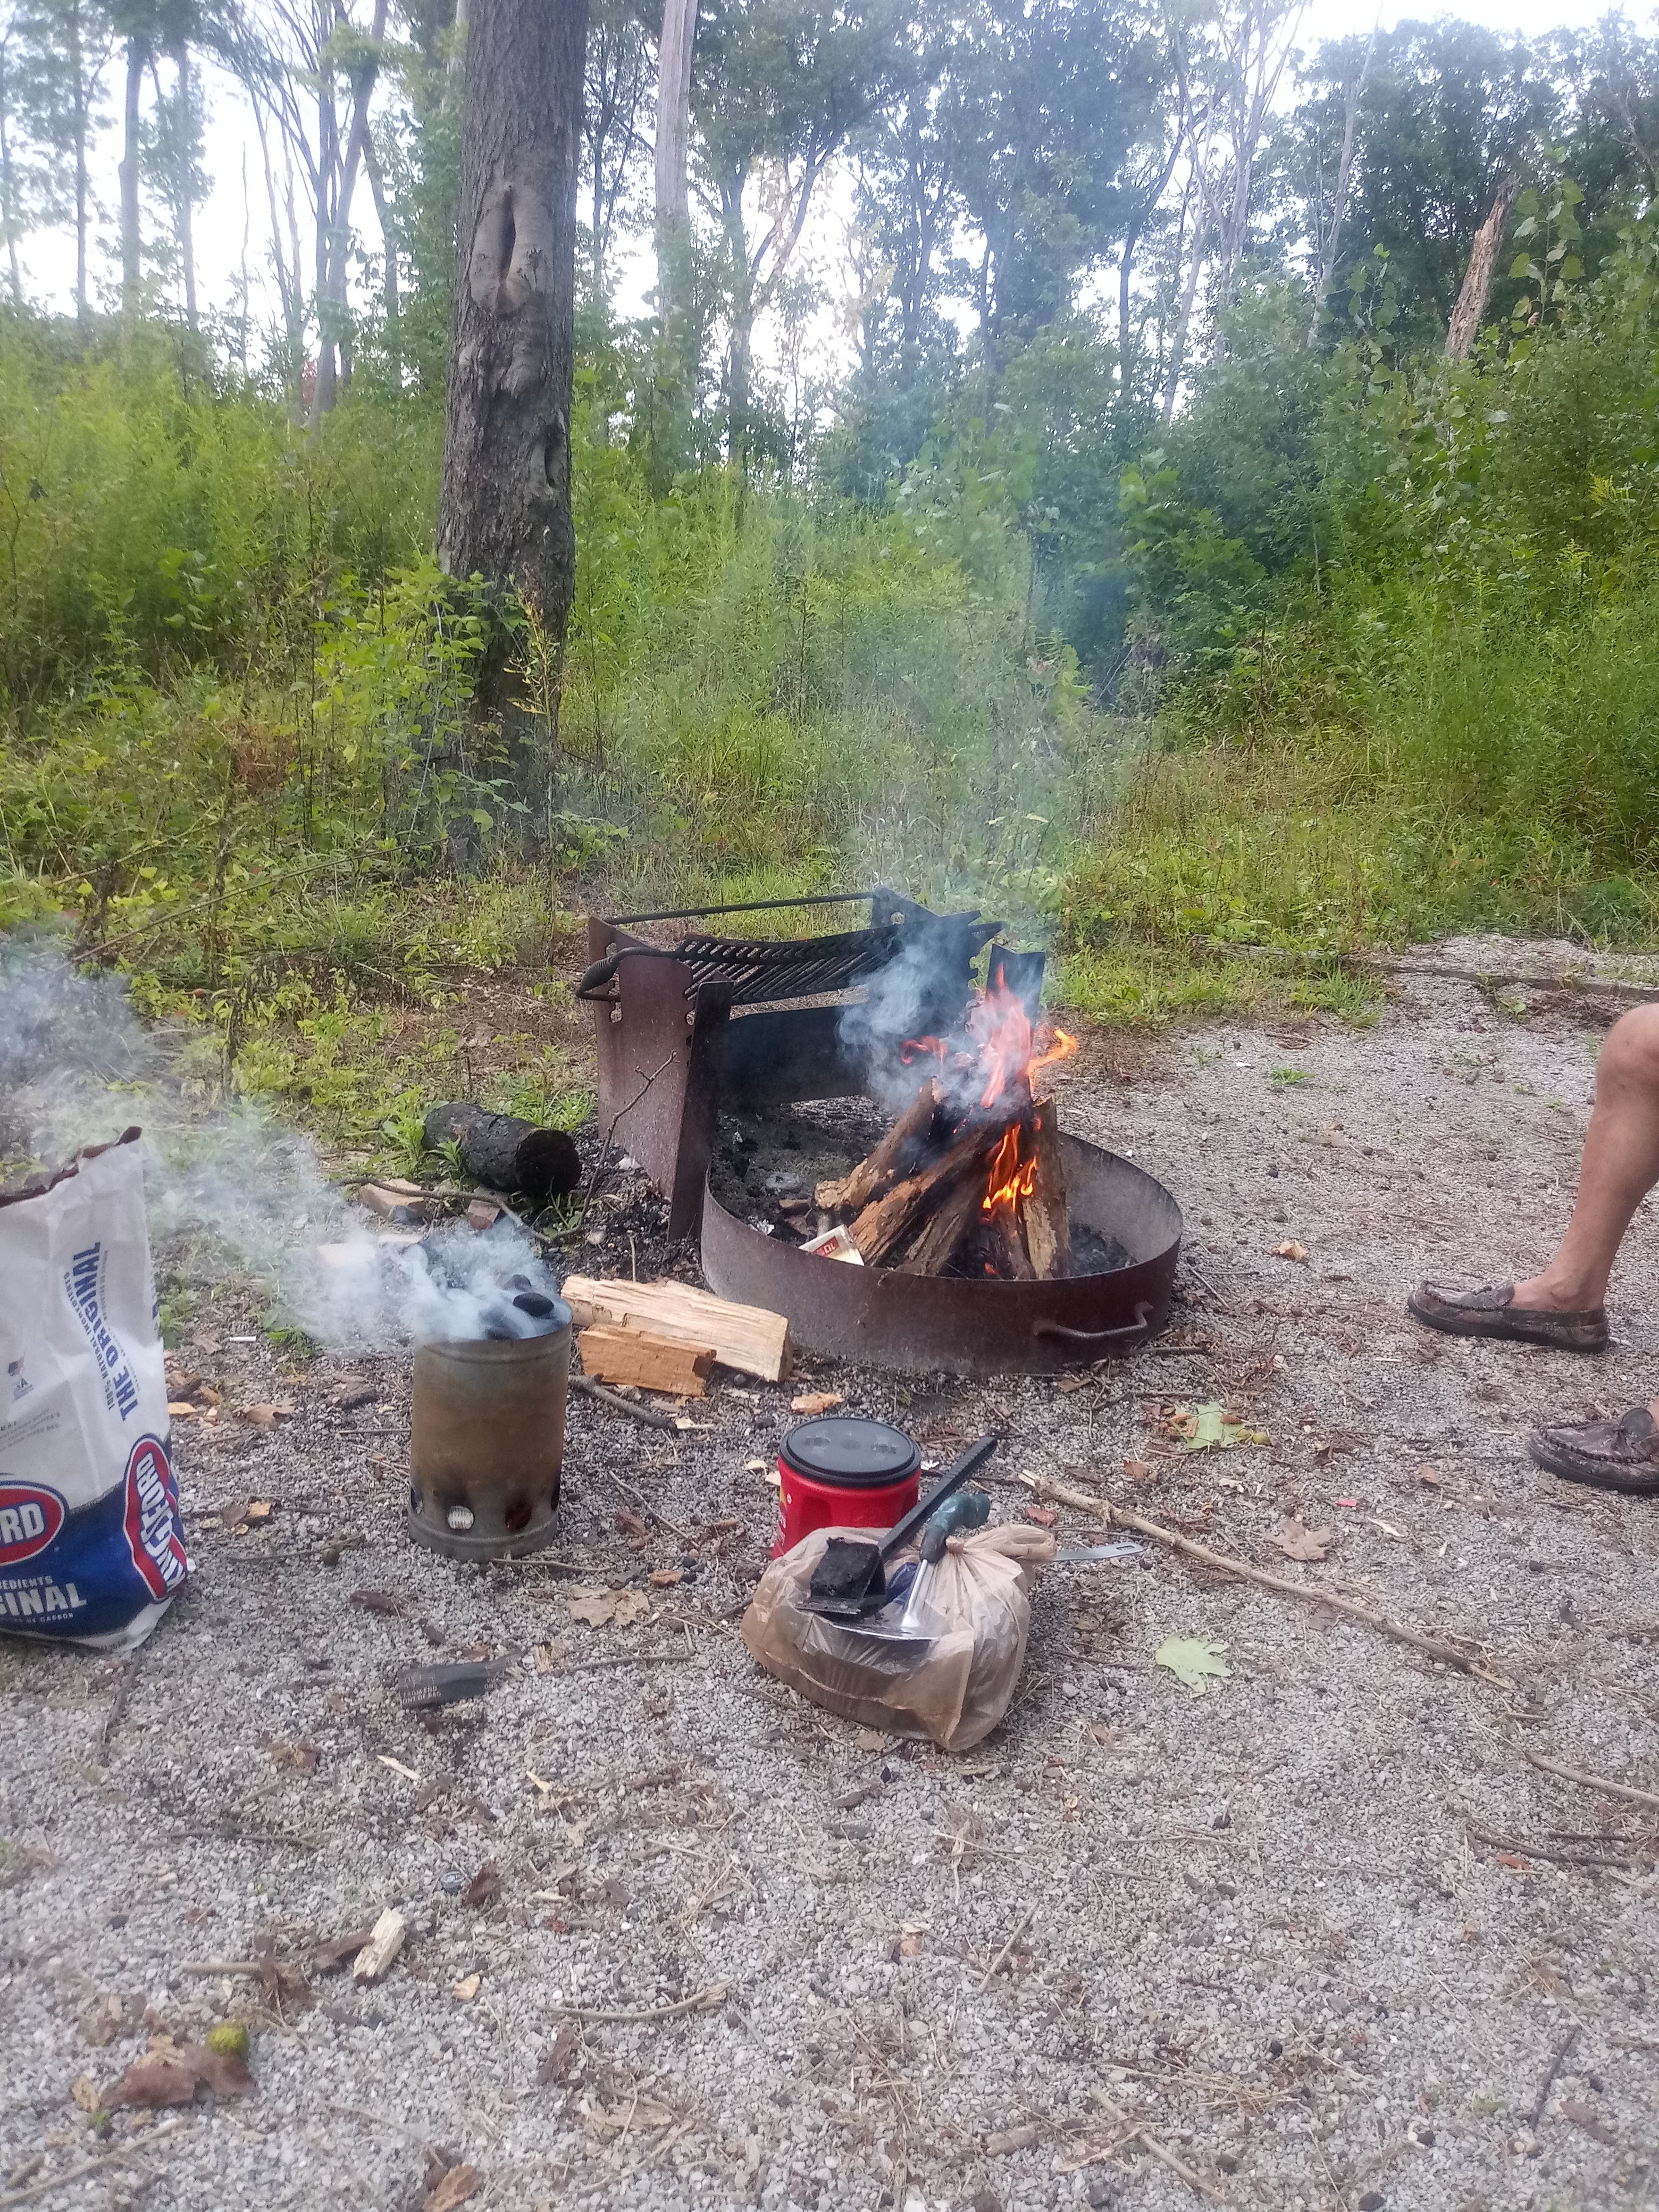 Our 1st campfire cooking dinner